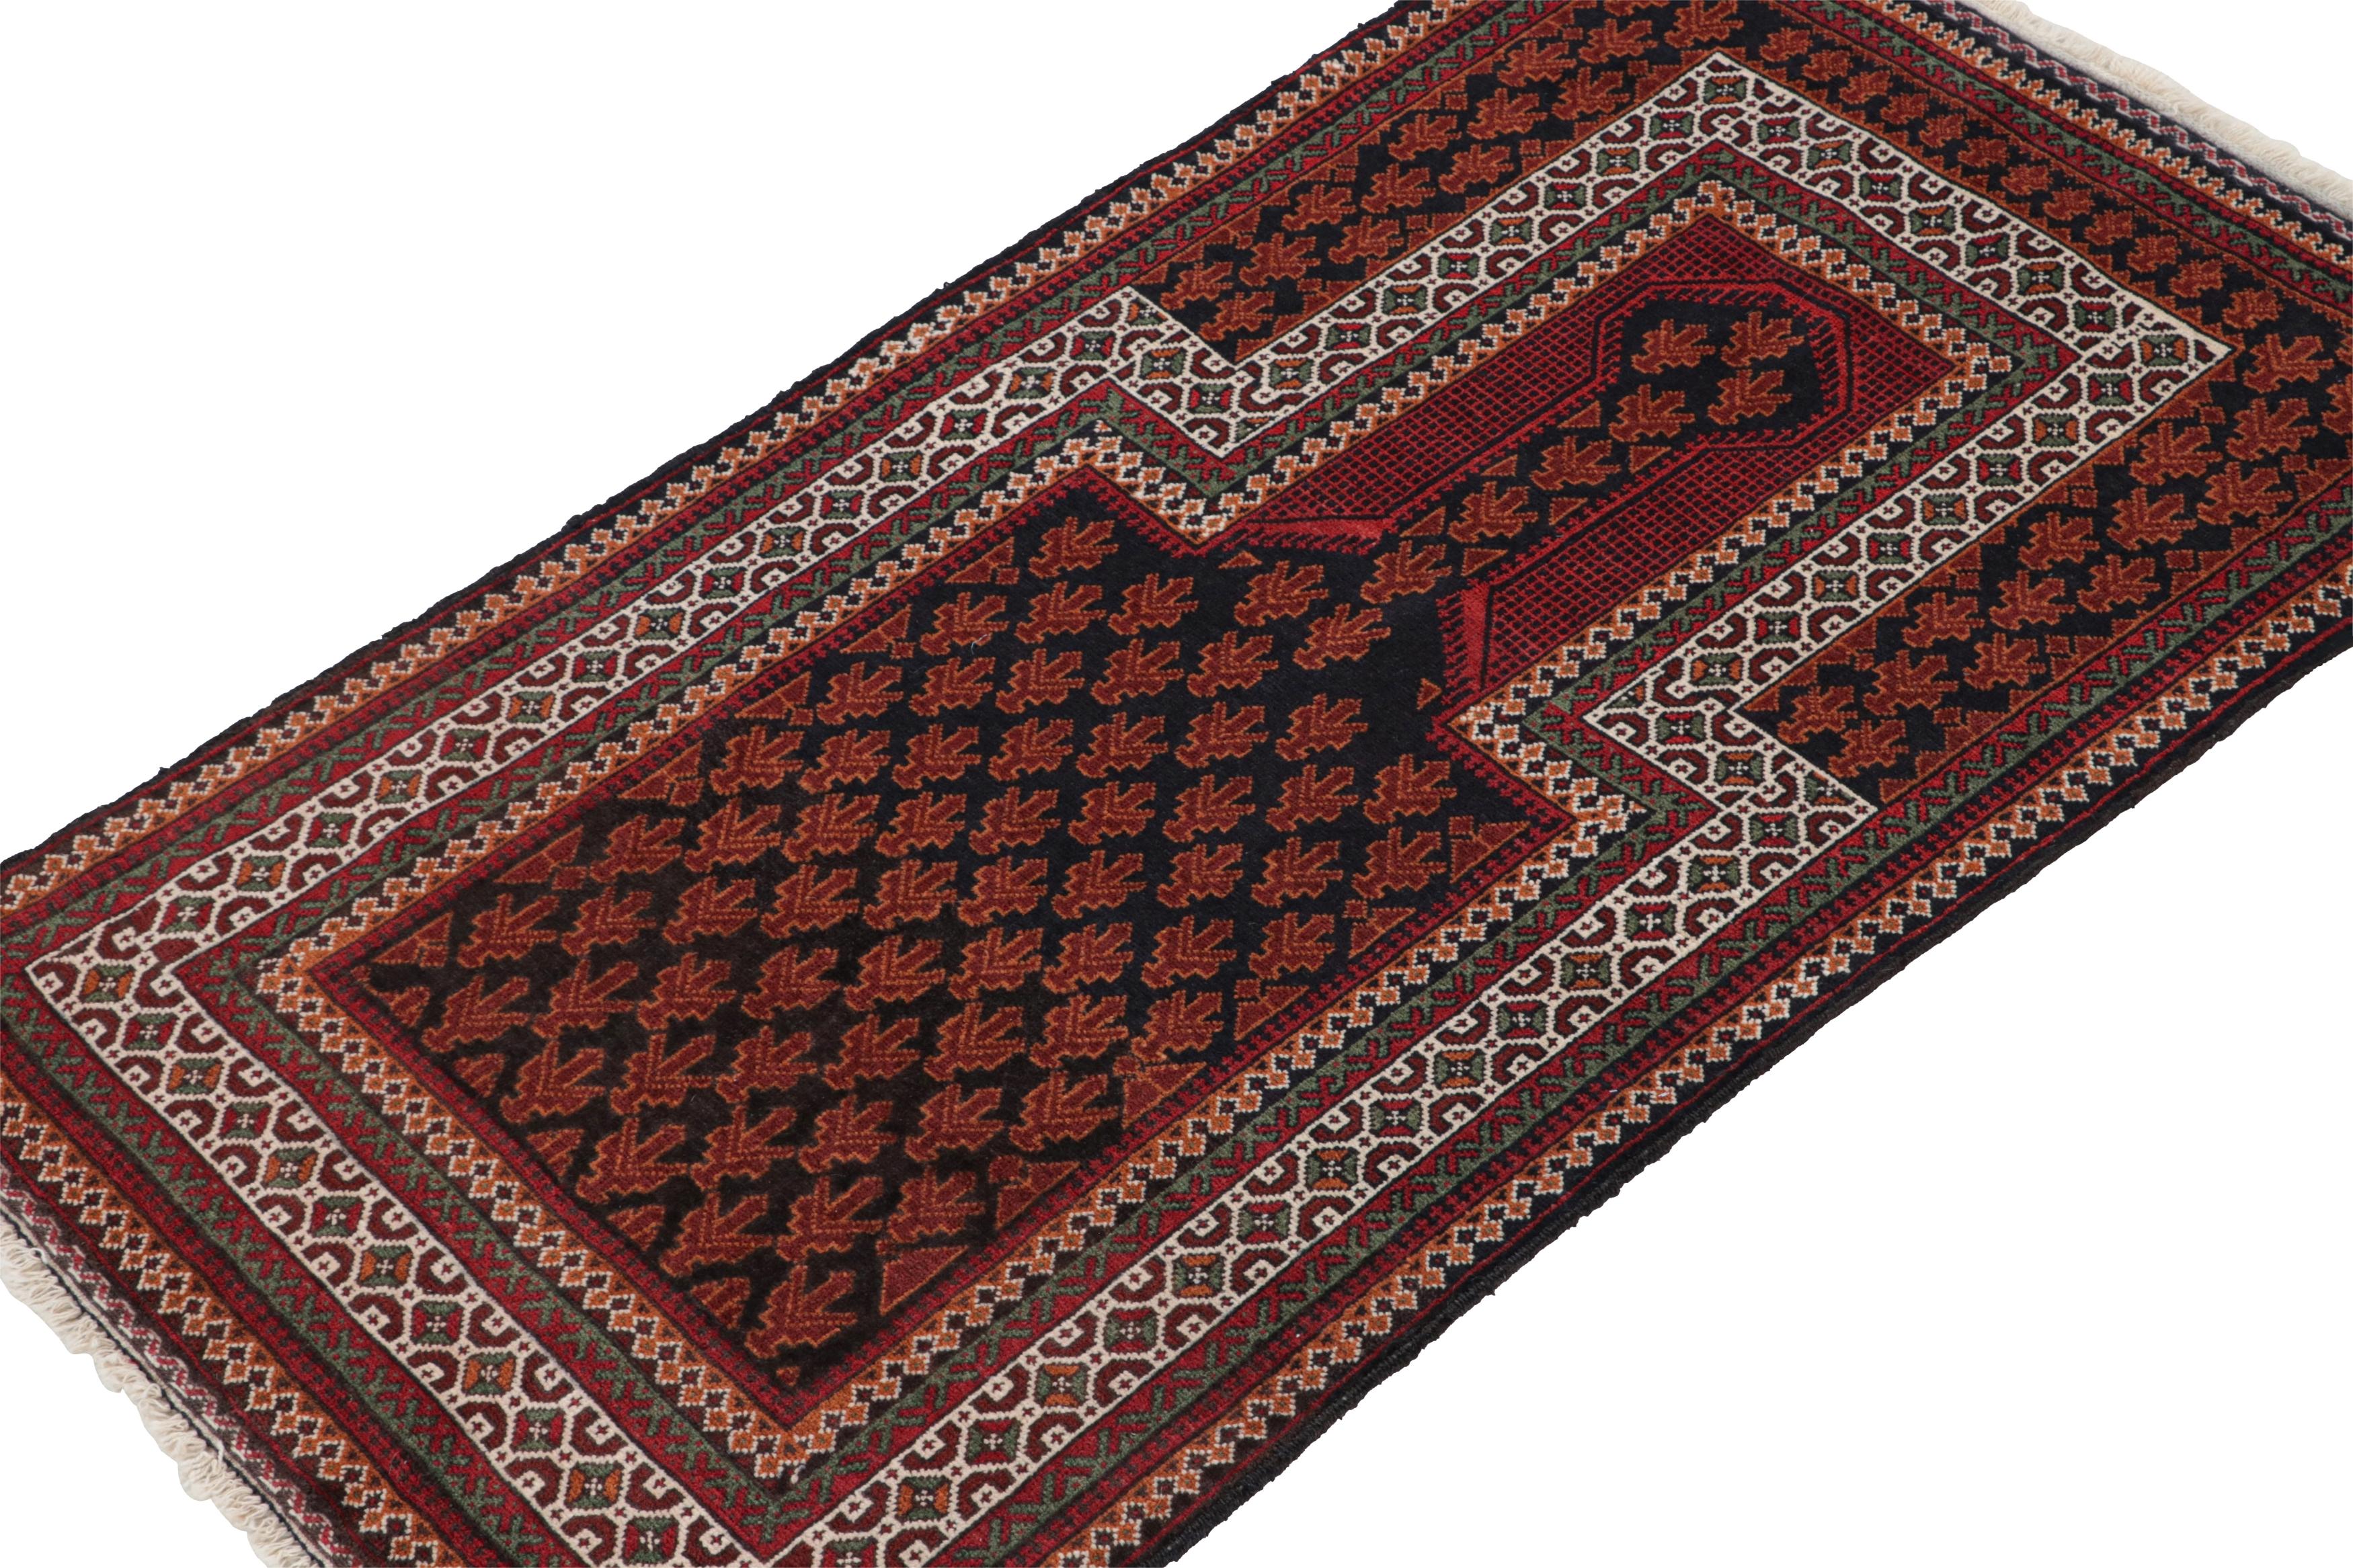 Hand-knotted in wool, this 3x5 Baluch Persian rug of the 1950s is the latest to enter Rug & Kilim’s Antique & Vintage collection.

On the Design:

The Persian Baluch rug carries tribal patterns in rich tones of red, orange, white & black. A keen eye